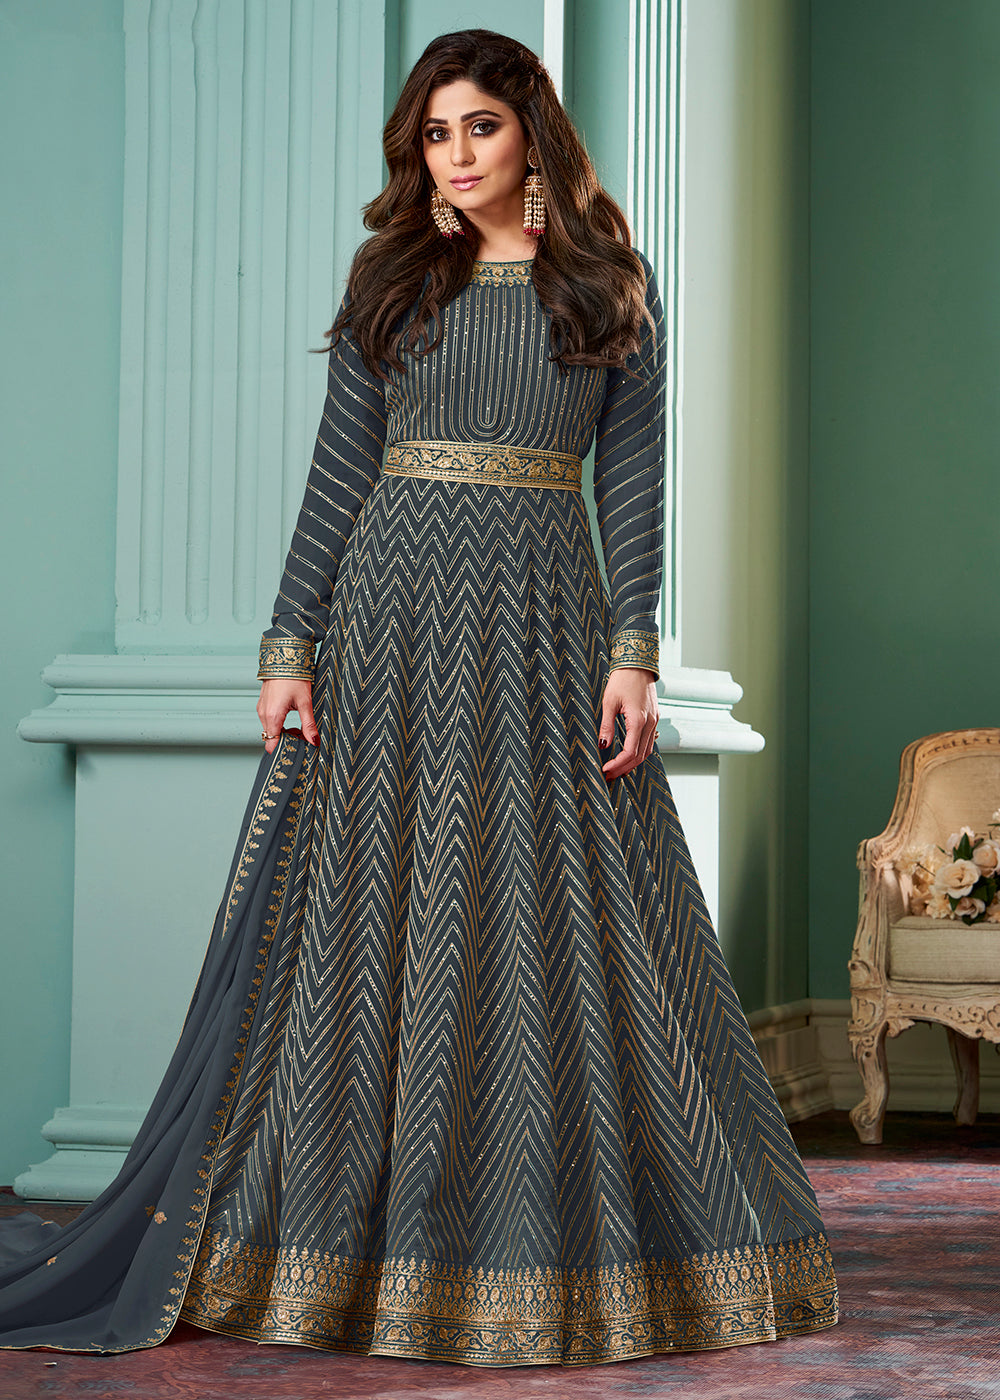 Shop Now Classy Grey Belt Style Anarkali Gown Online featuring Shamita Shetty at  Empress Clothing in USA.